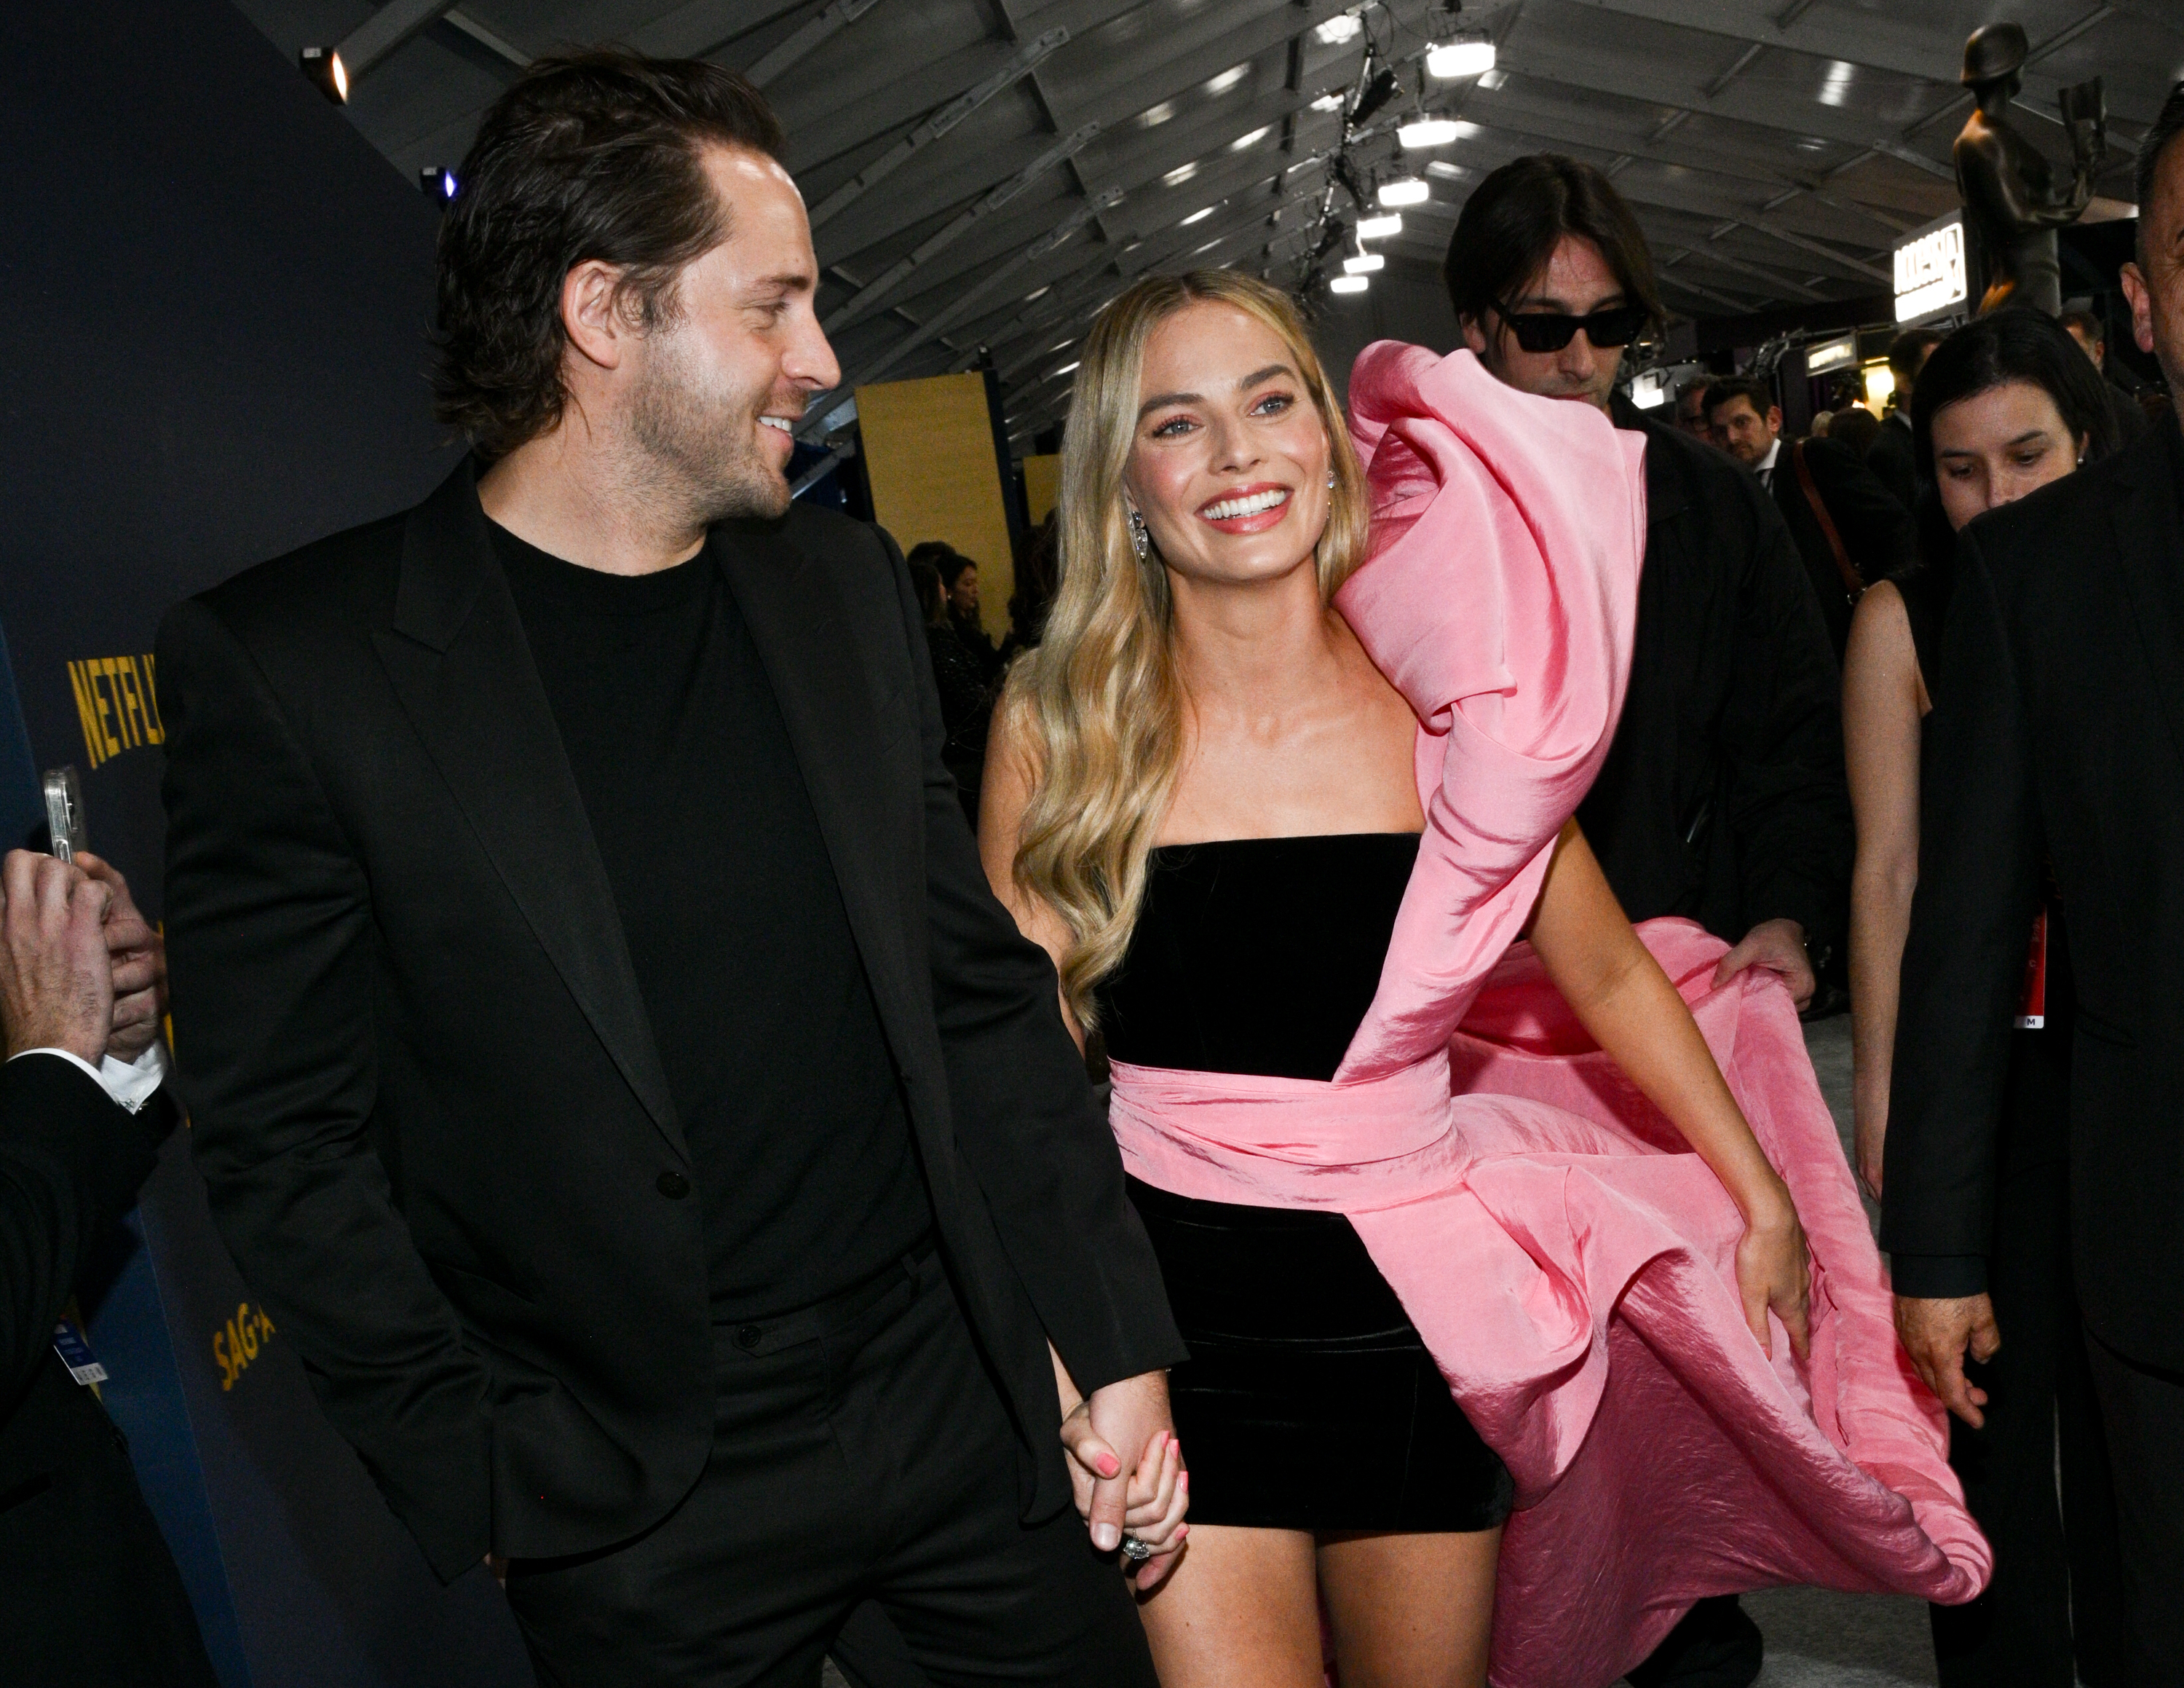 Margot Robbie, in a strapless black dress with a large pink ruffle, holds hands with a man in a black suit at a formal event